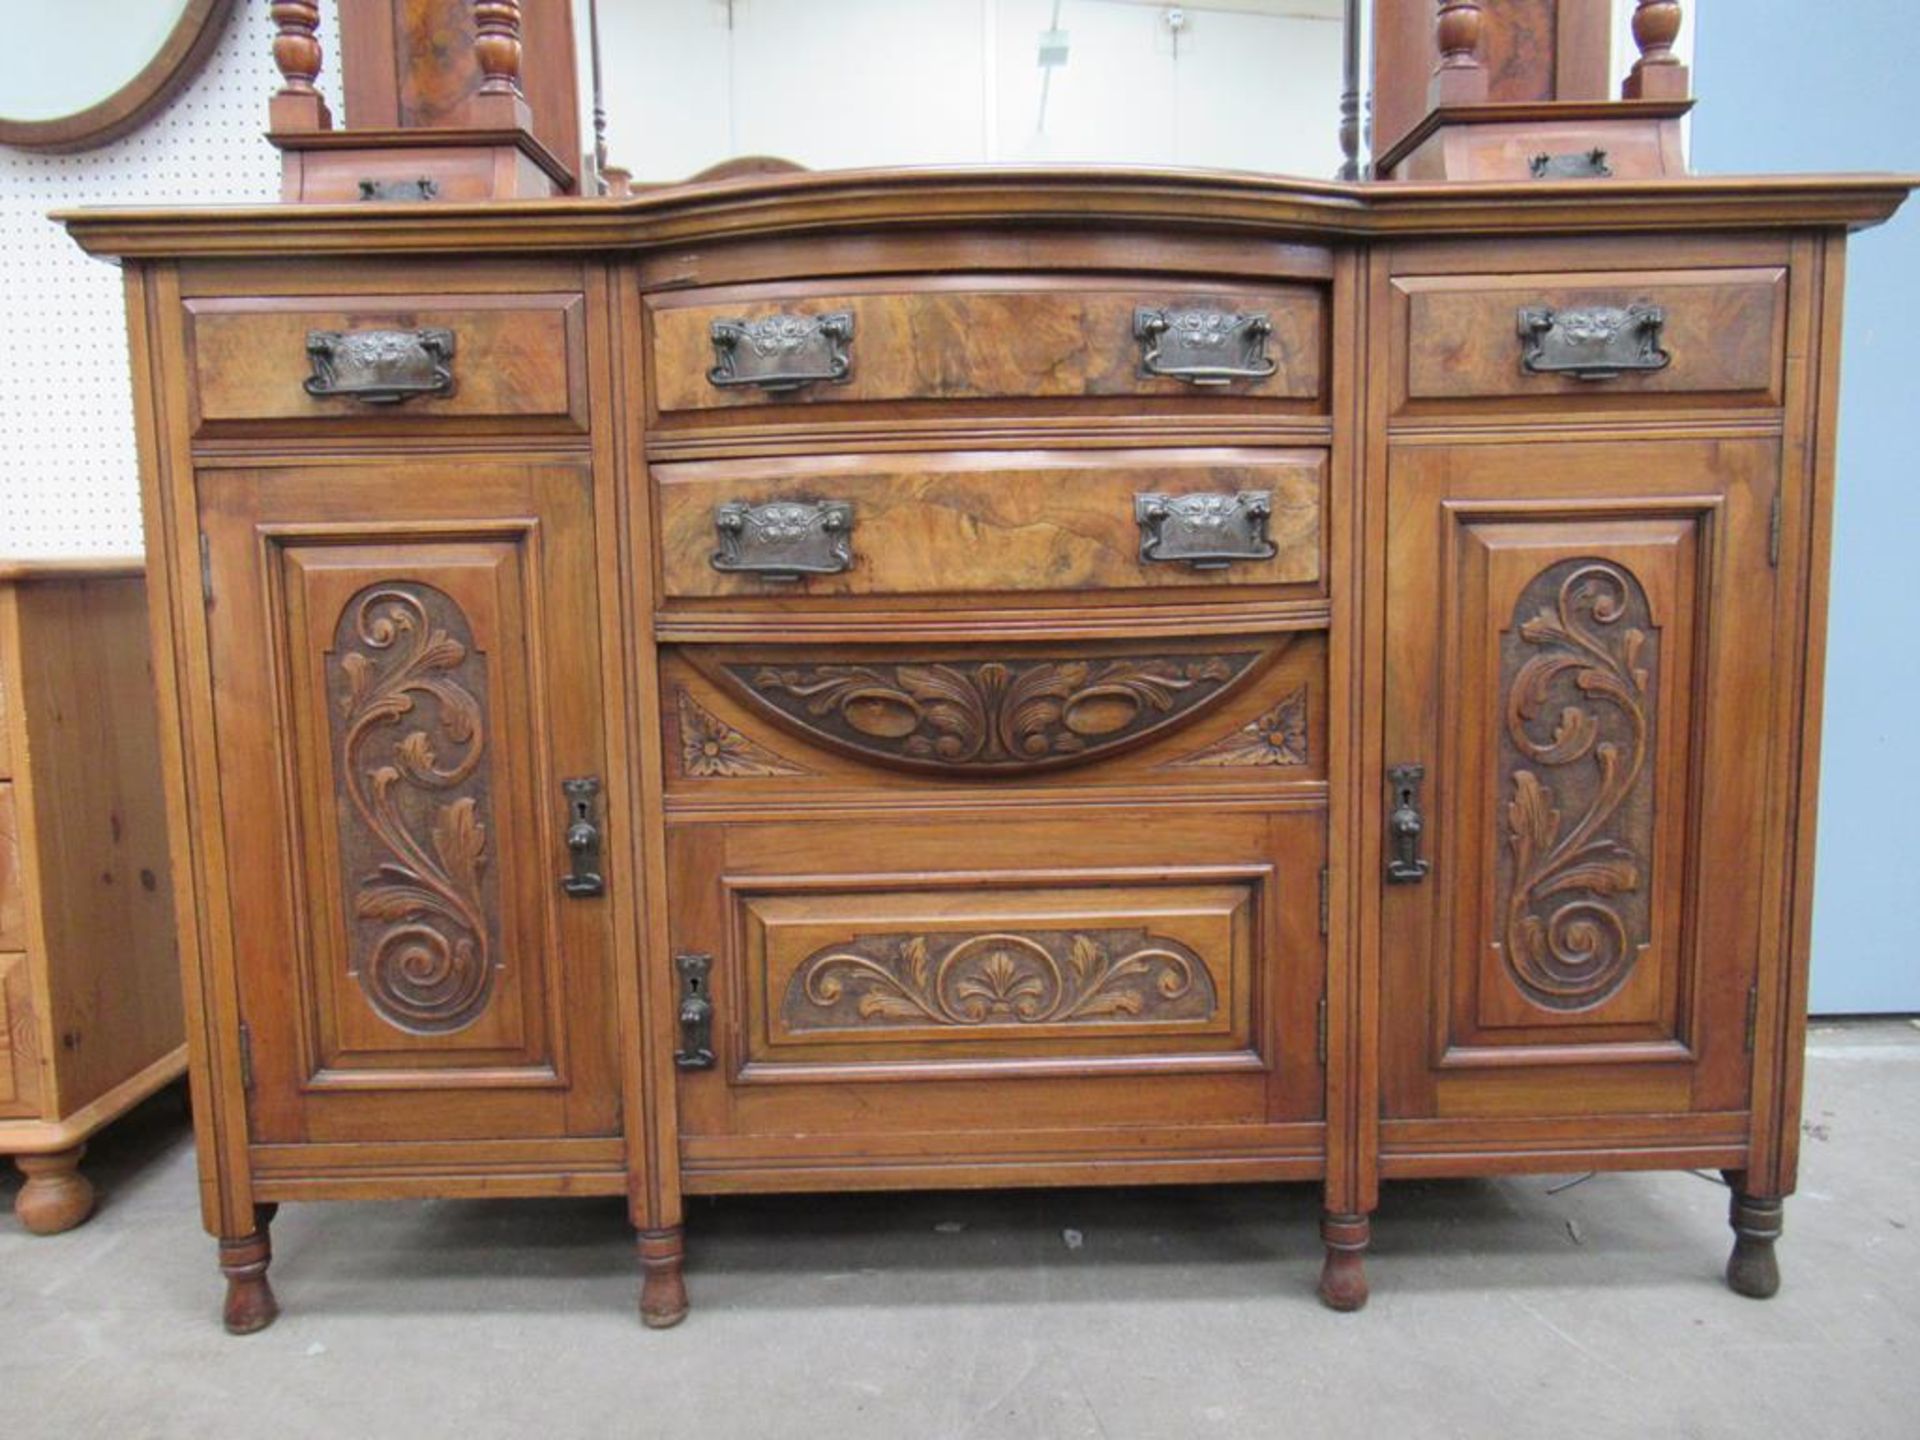 Detailed Early Four drawer, Three Door Mirror Backed Sideboard with Inlaid Walnut Panels - Image 4 of 4